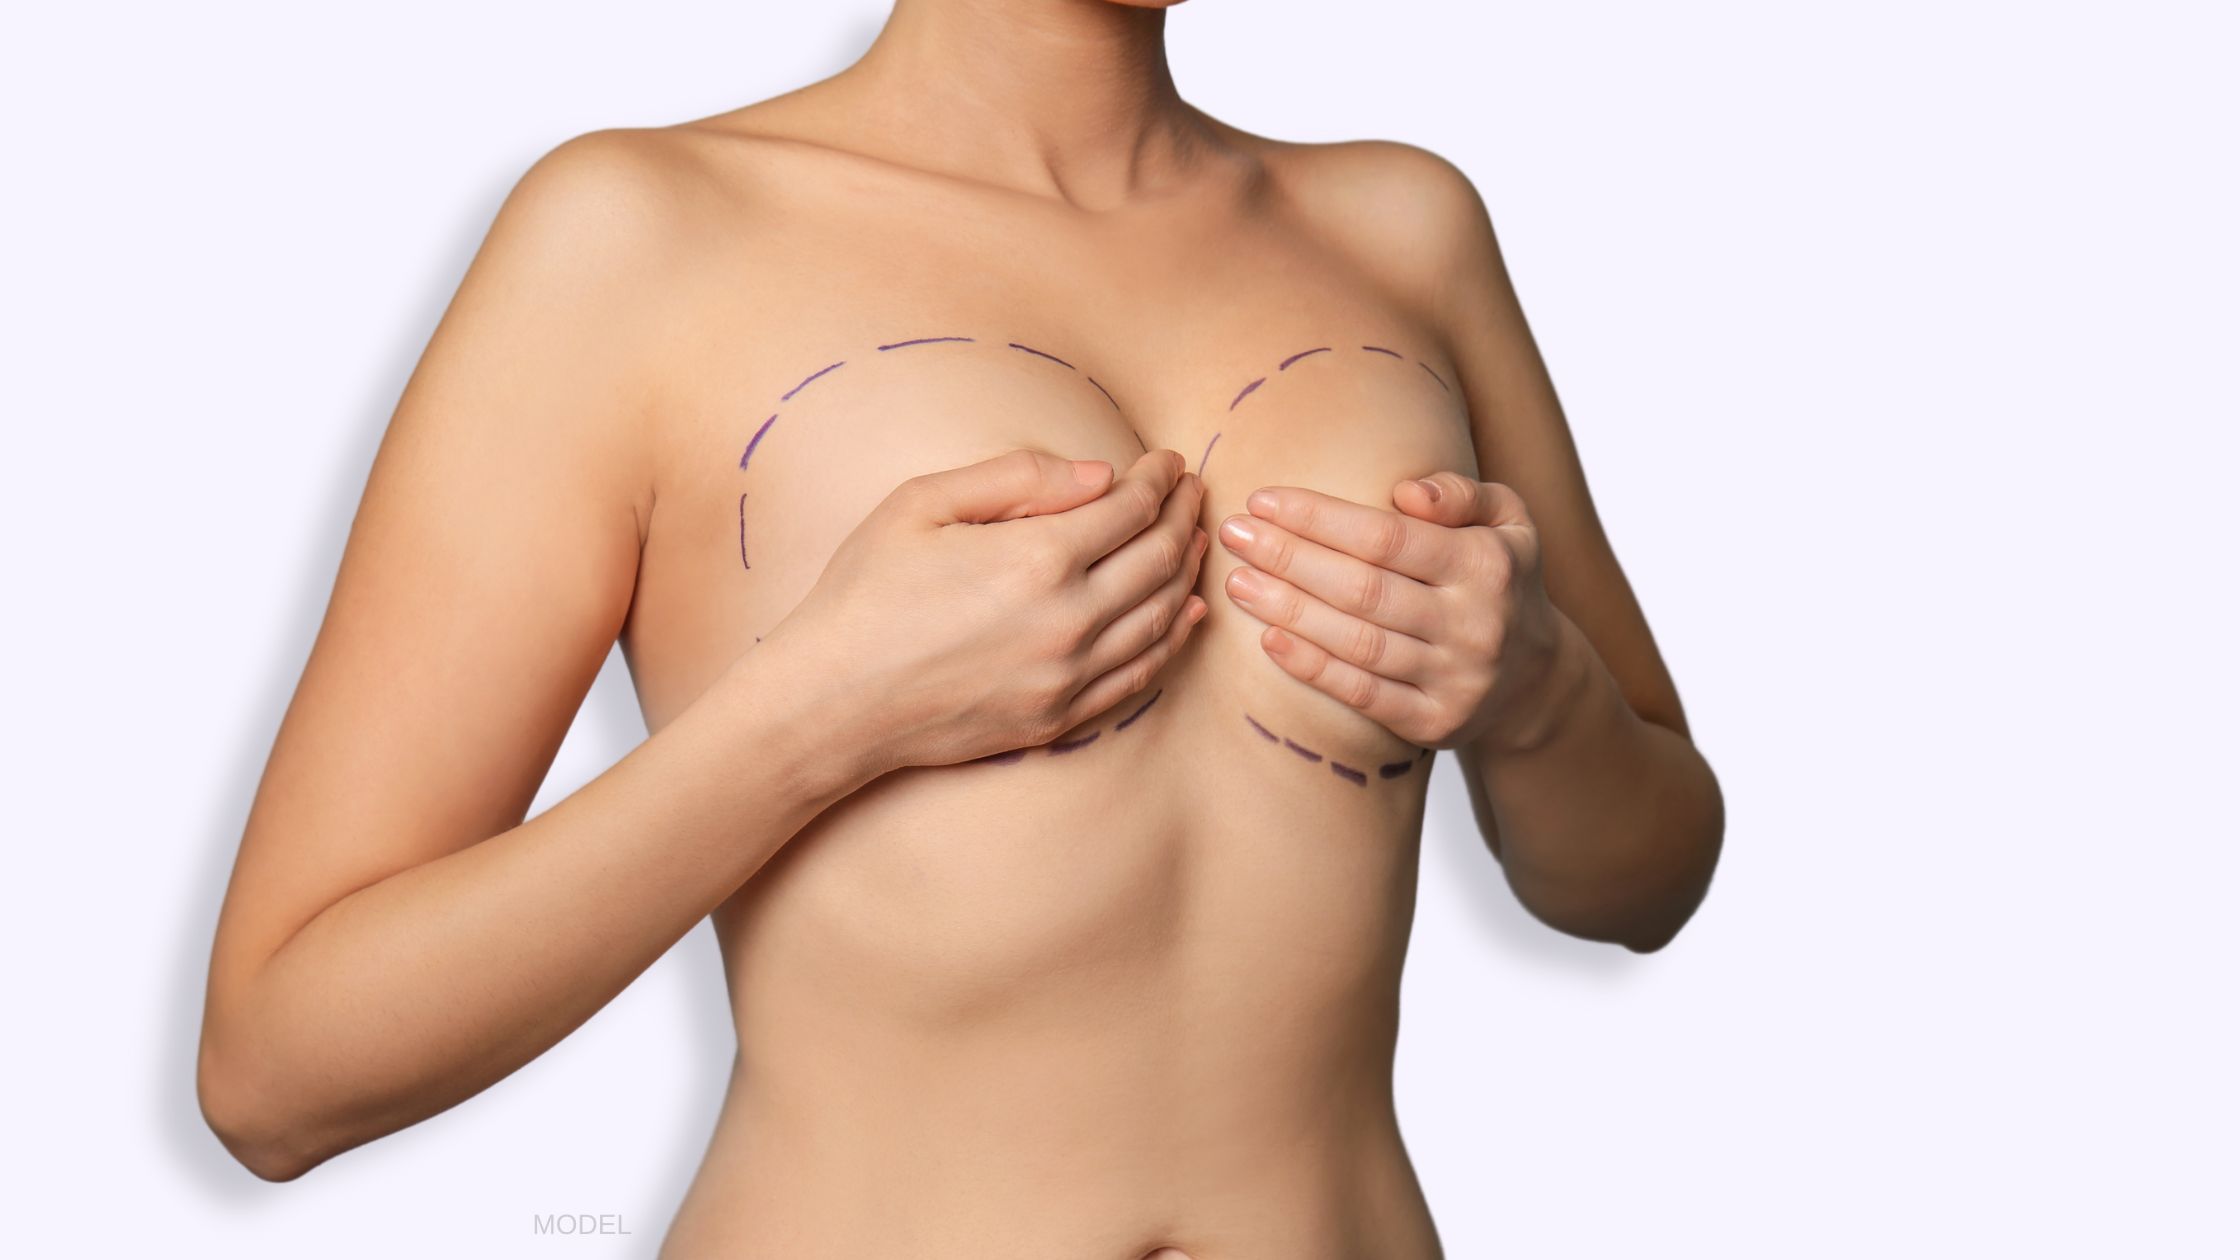 Is a Mastopexy or a Breast Lift Always Needed? - Part 3